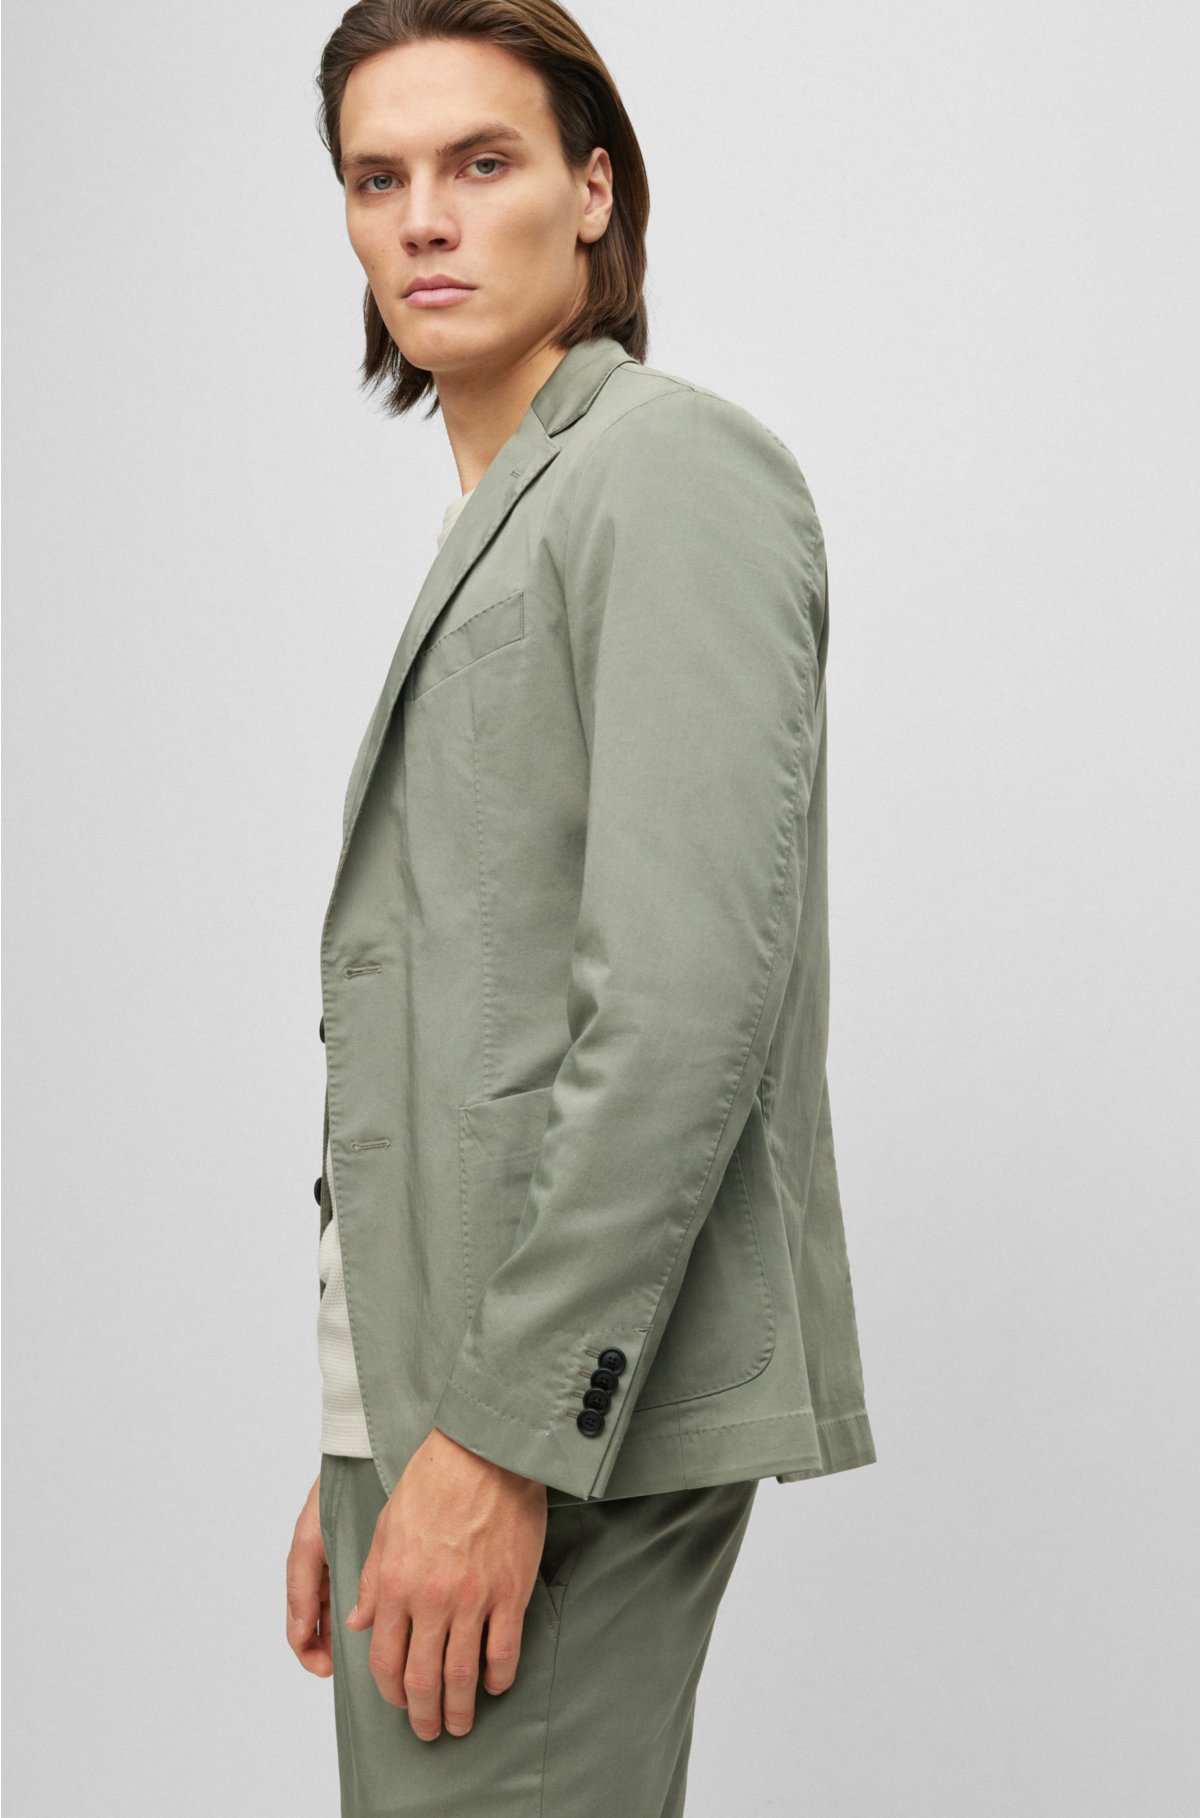 BOSS - Slim-fit jacket in a crease-resistant cotton blend